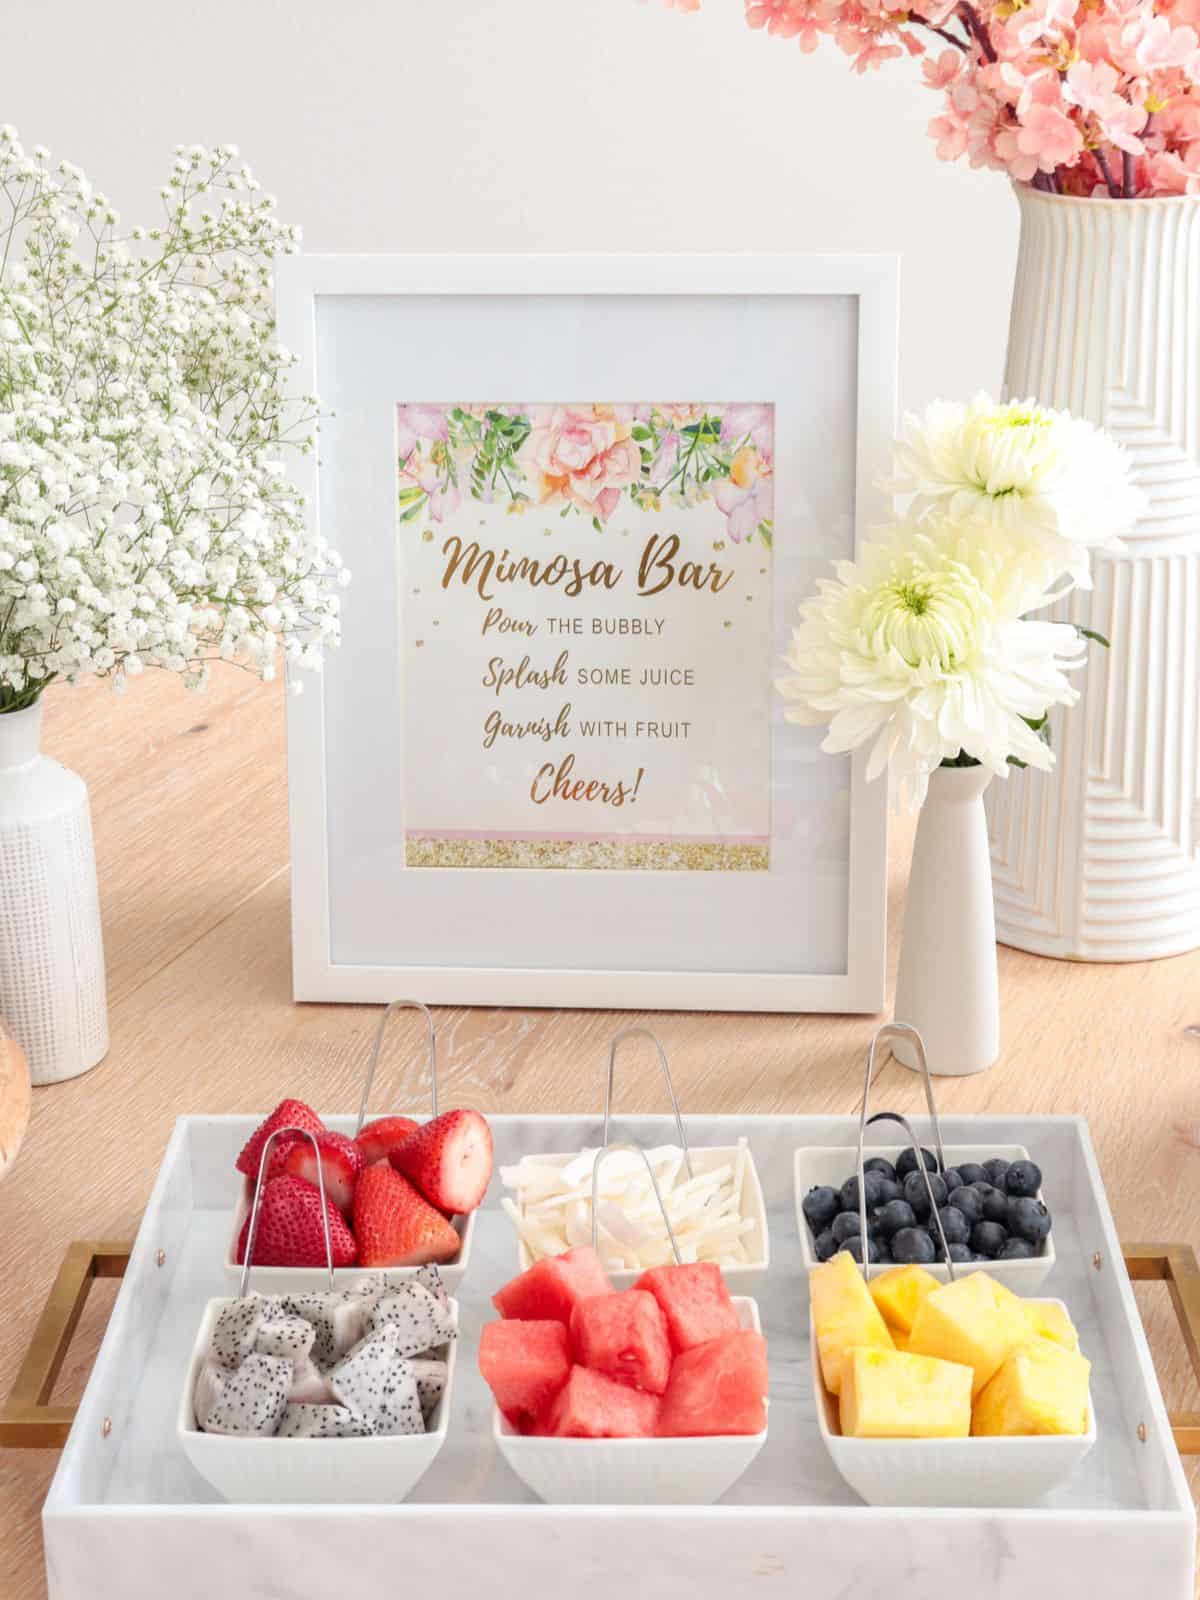 A mimosa bar set up with fruit and a sign.